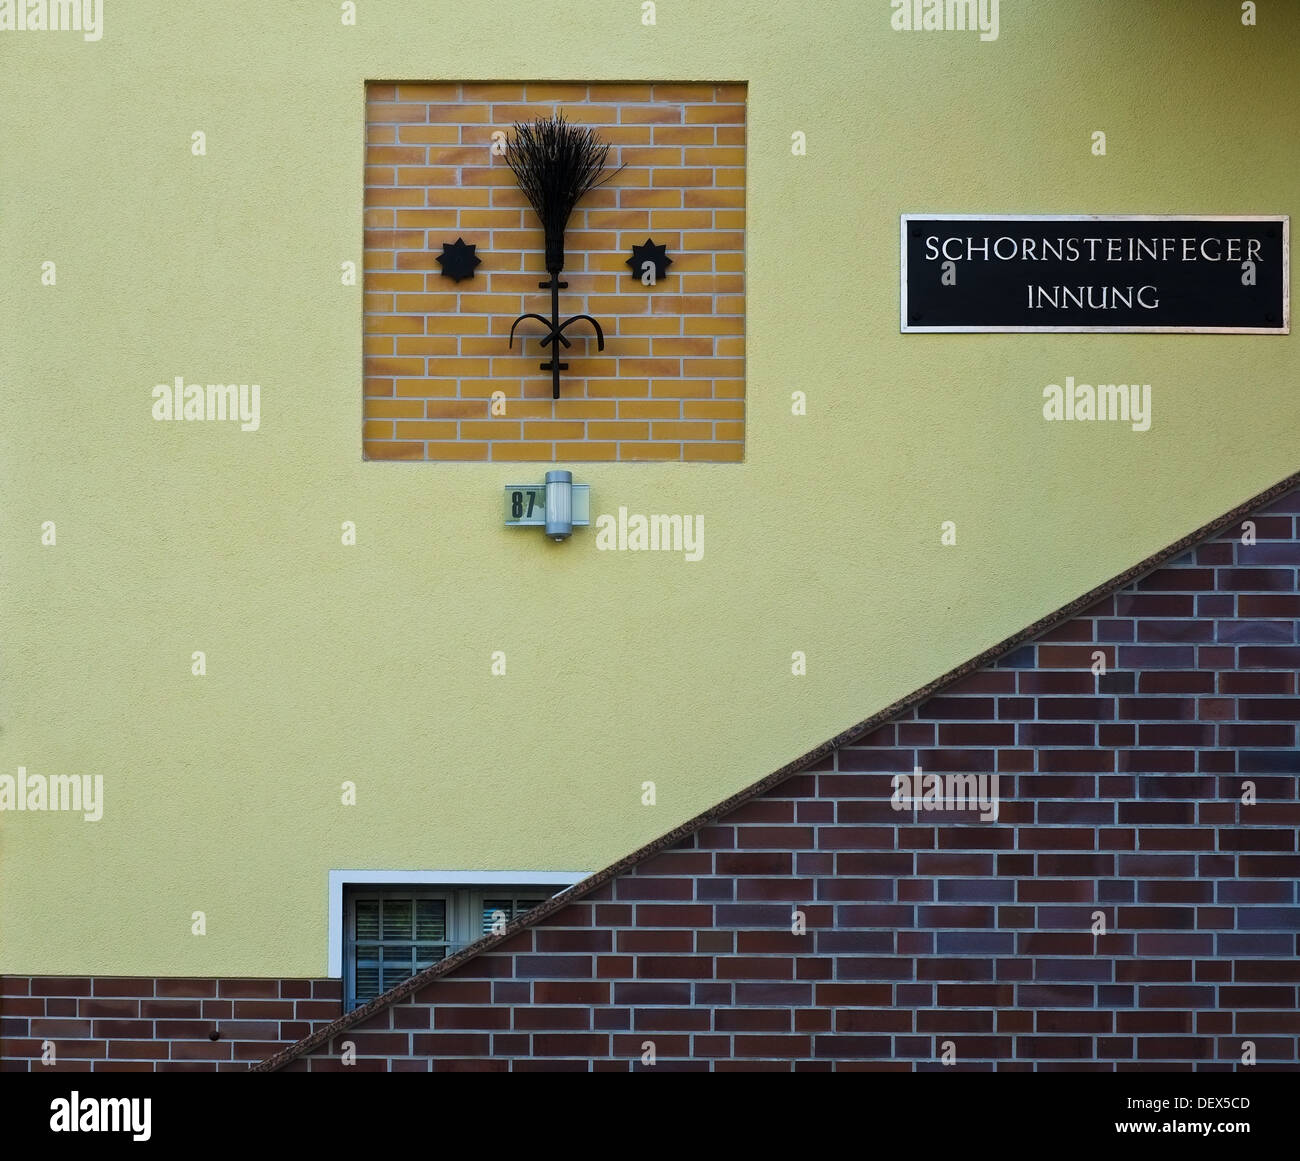 Innung High Resolution Stock Photography and Images - Alamy